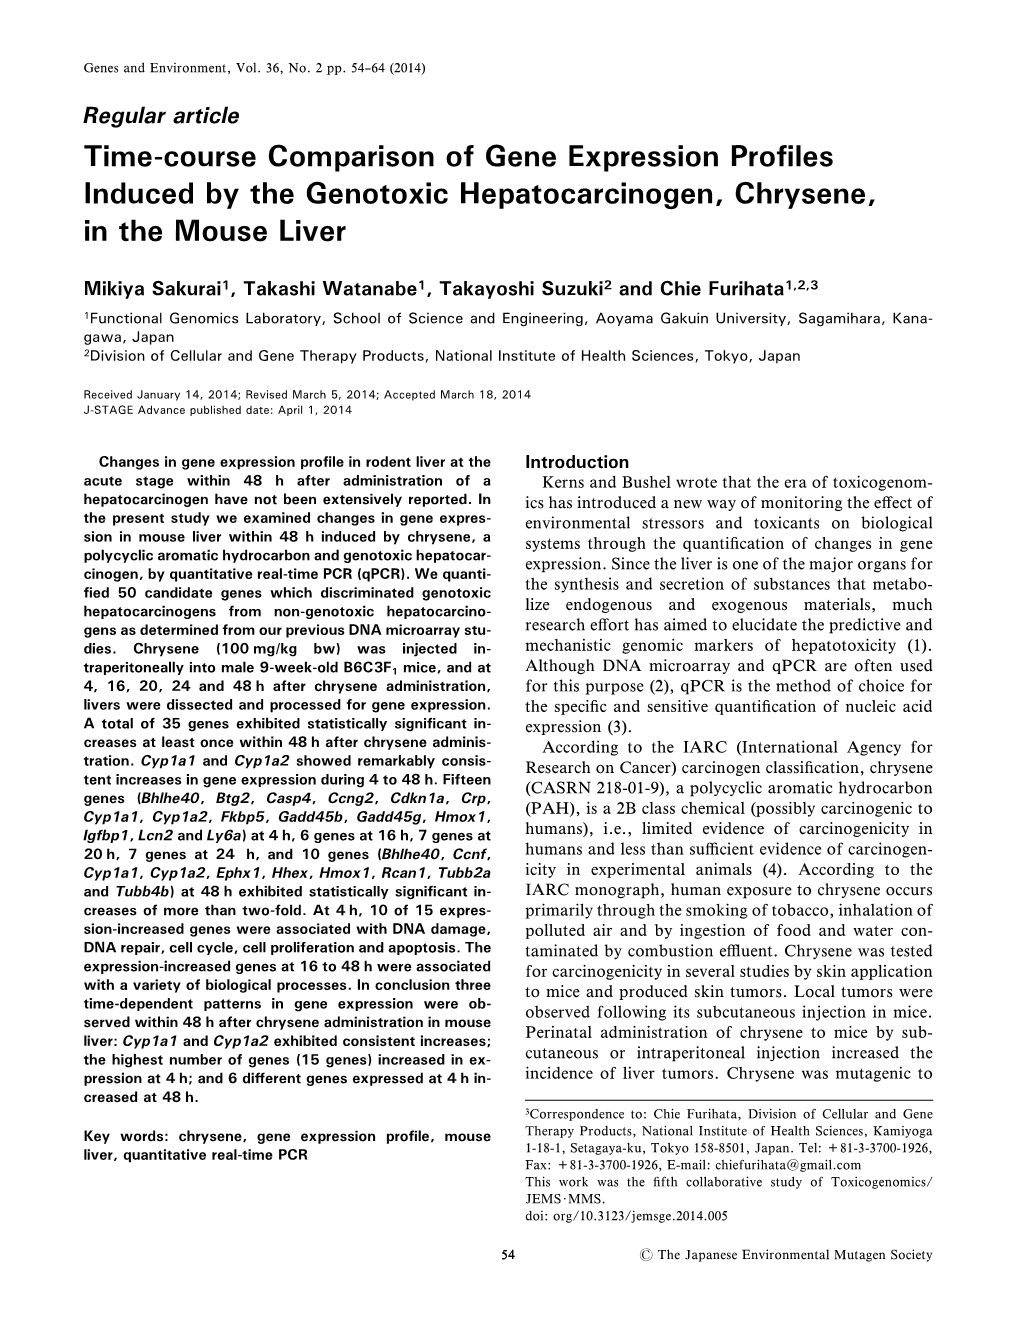 Time-Course Comparison of Gene Expression Proˆles Induced by the Genotoxic Hepatocarcinogen, Chrysene, in the Mouse Liver